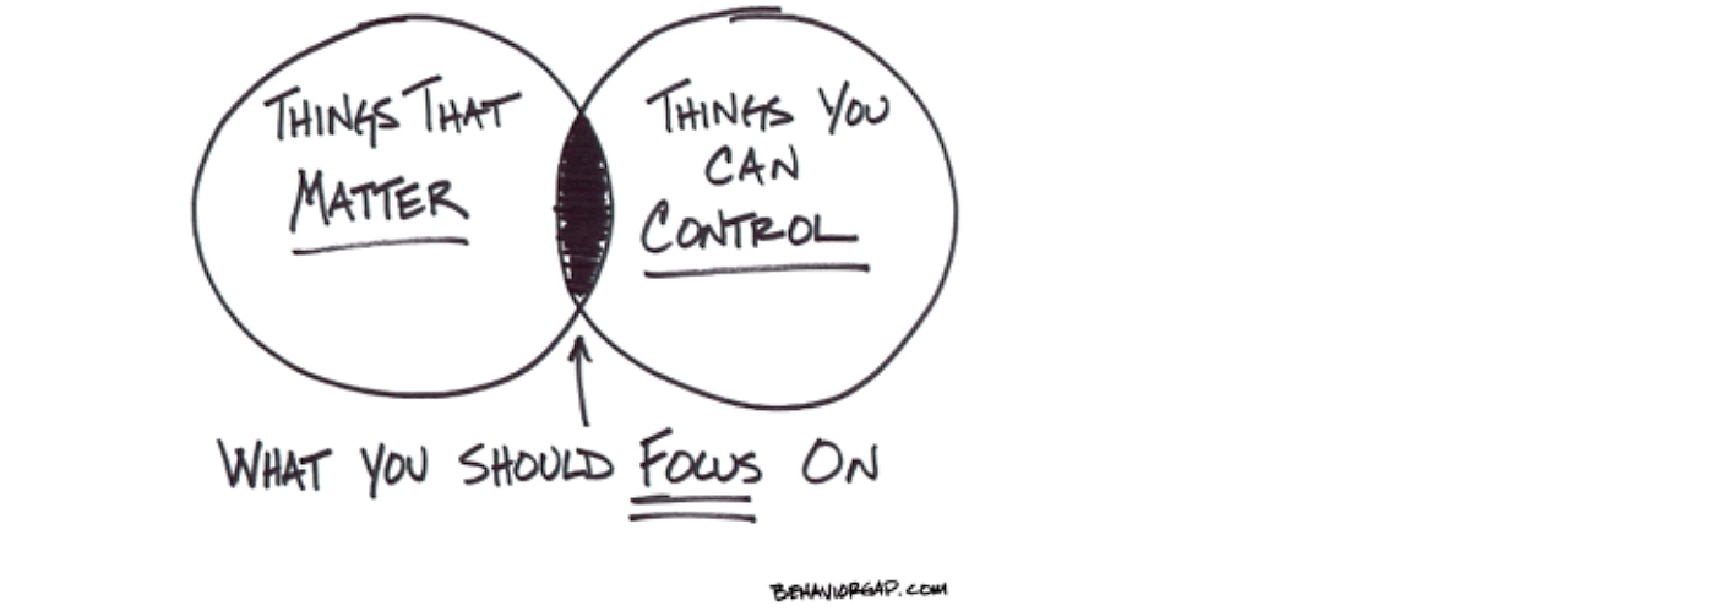 A hand-drawn Venn diagram shows “things that matter” in one circle, “things you can control” in another circle, and “What you should focus on” as the label for the area where the two circles overlap.